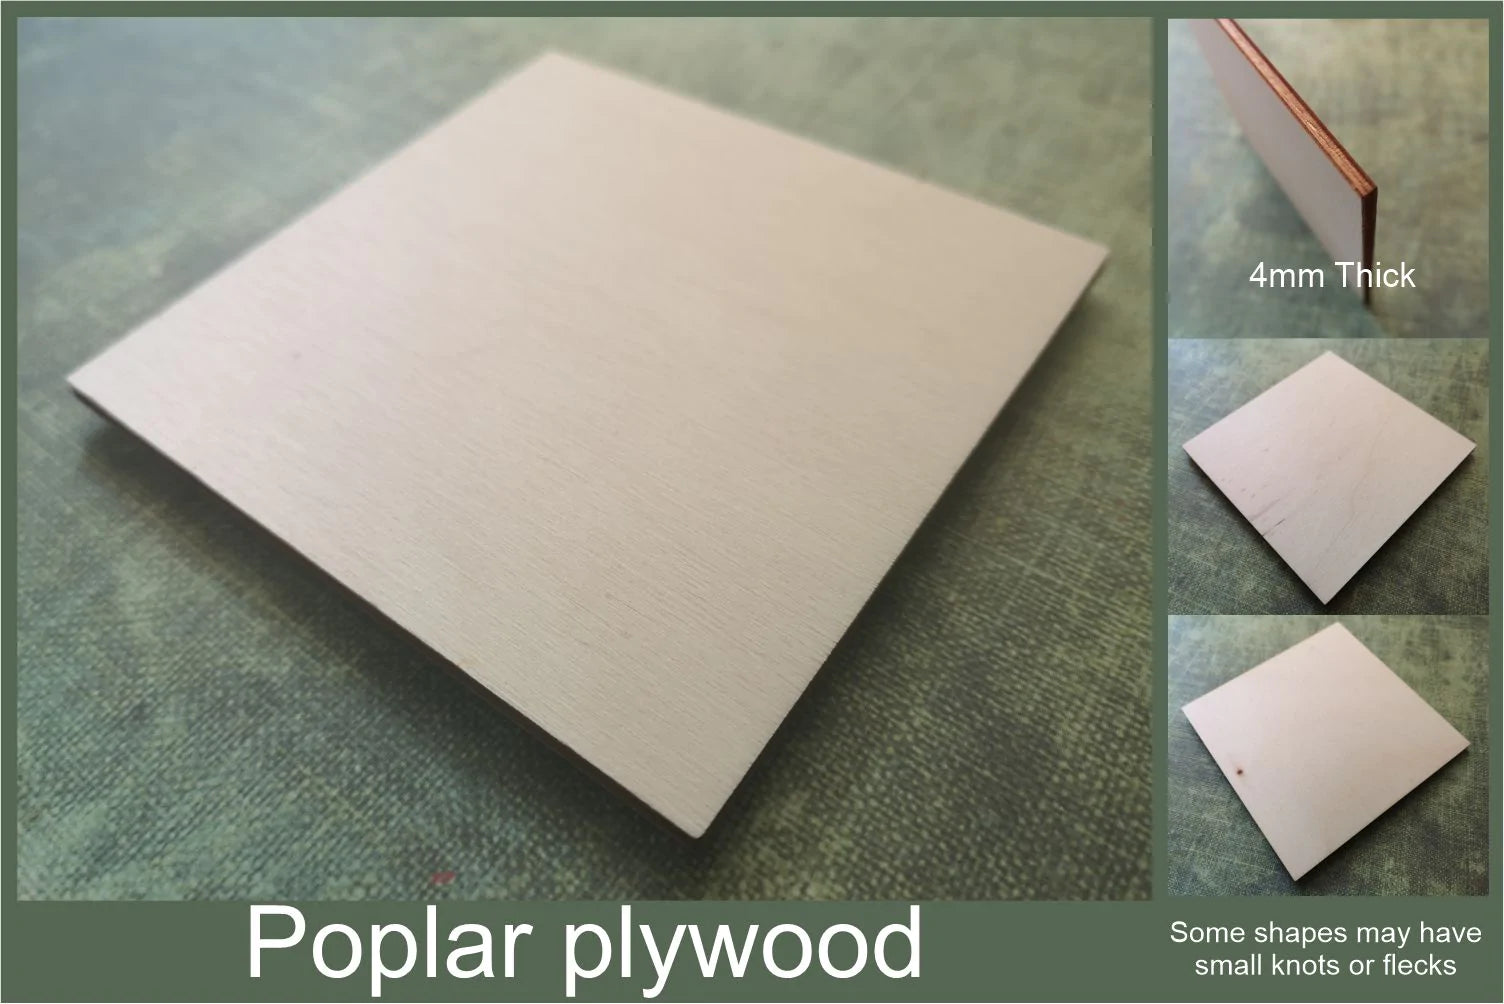 4mm thick poplar plywood used to make the Blood hound cut-outs ready for crafting